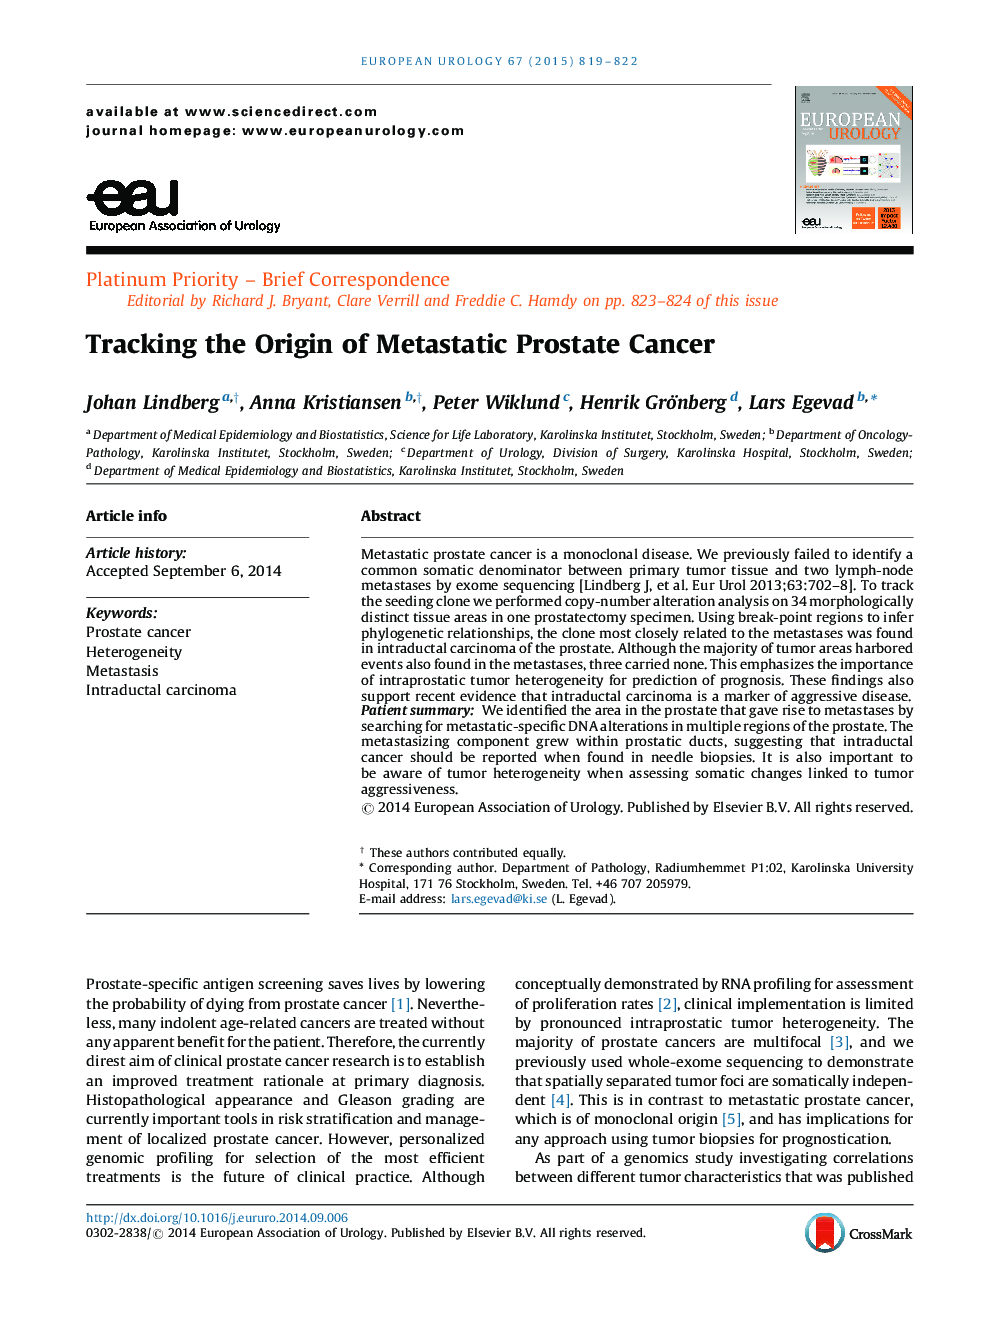 Tracking the Origin of Metastatic Prostate Cancer